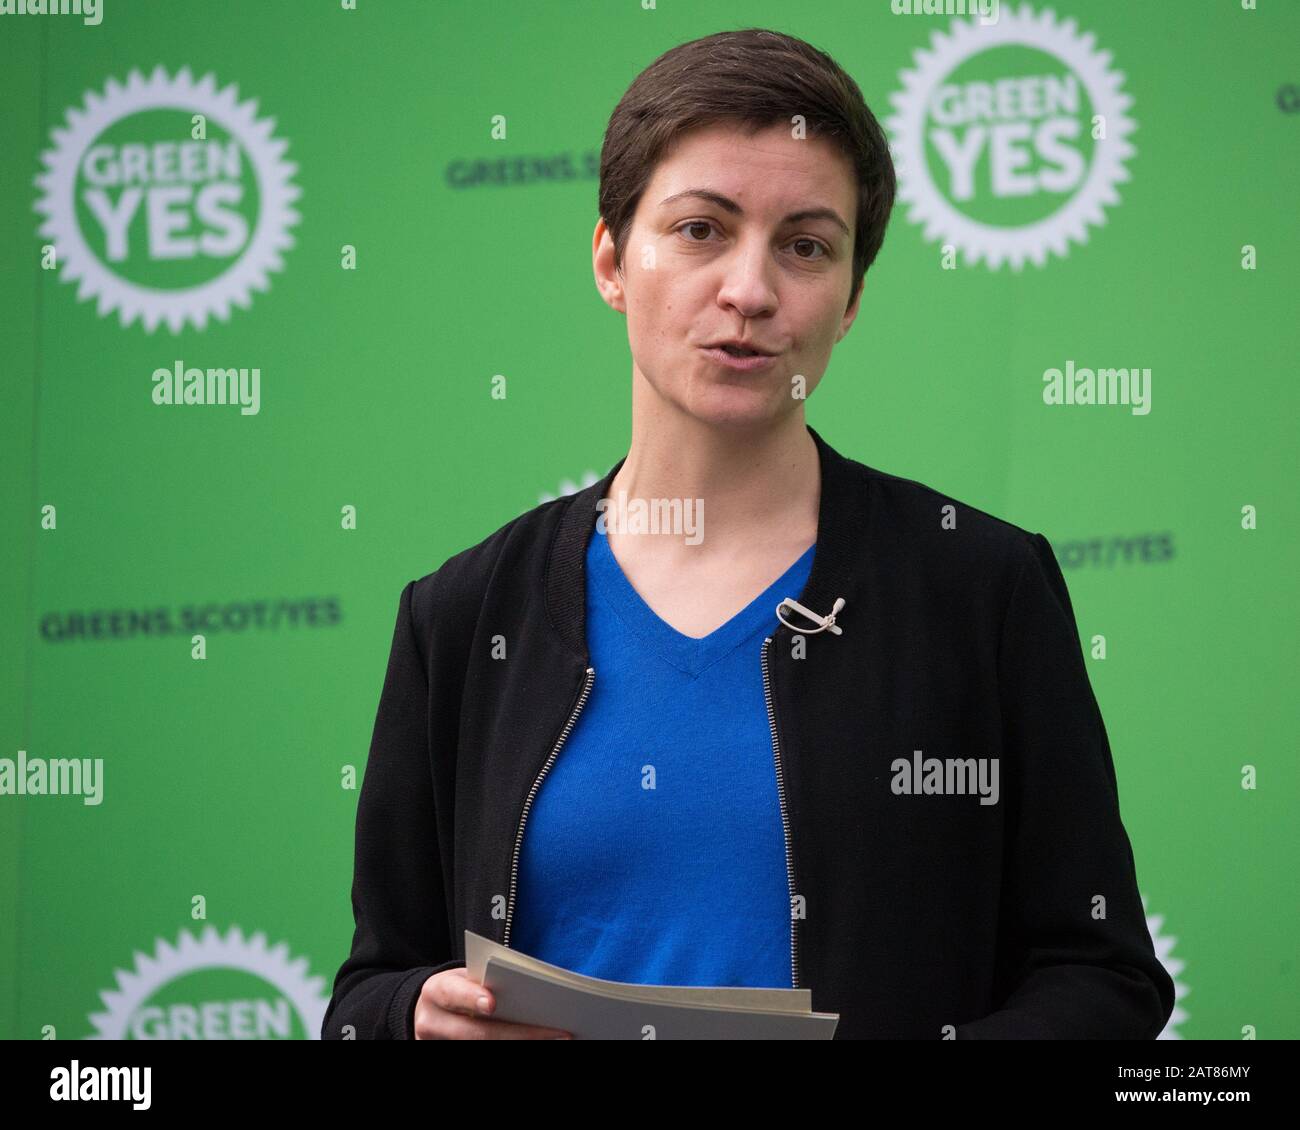 Glasgow, UK. 31st Jan, 2020. Pictured: Ska Keller MEP - president of the Green group in the European Parliament. On the day the UK leaves the European Union, the Scottish Greens stage a major rally to launch a new Green Yes campaign for Scotland to re-join the EU as an independent nation. Scottish Greens co-leader Patrick Harvie is joined by Ska Keller MEP, president of the Green group in the European Parliament, who will give a speech. Credit: Colin Fisher/Alamy Live News Stock Photo